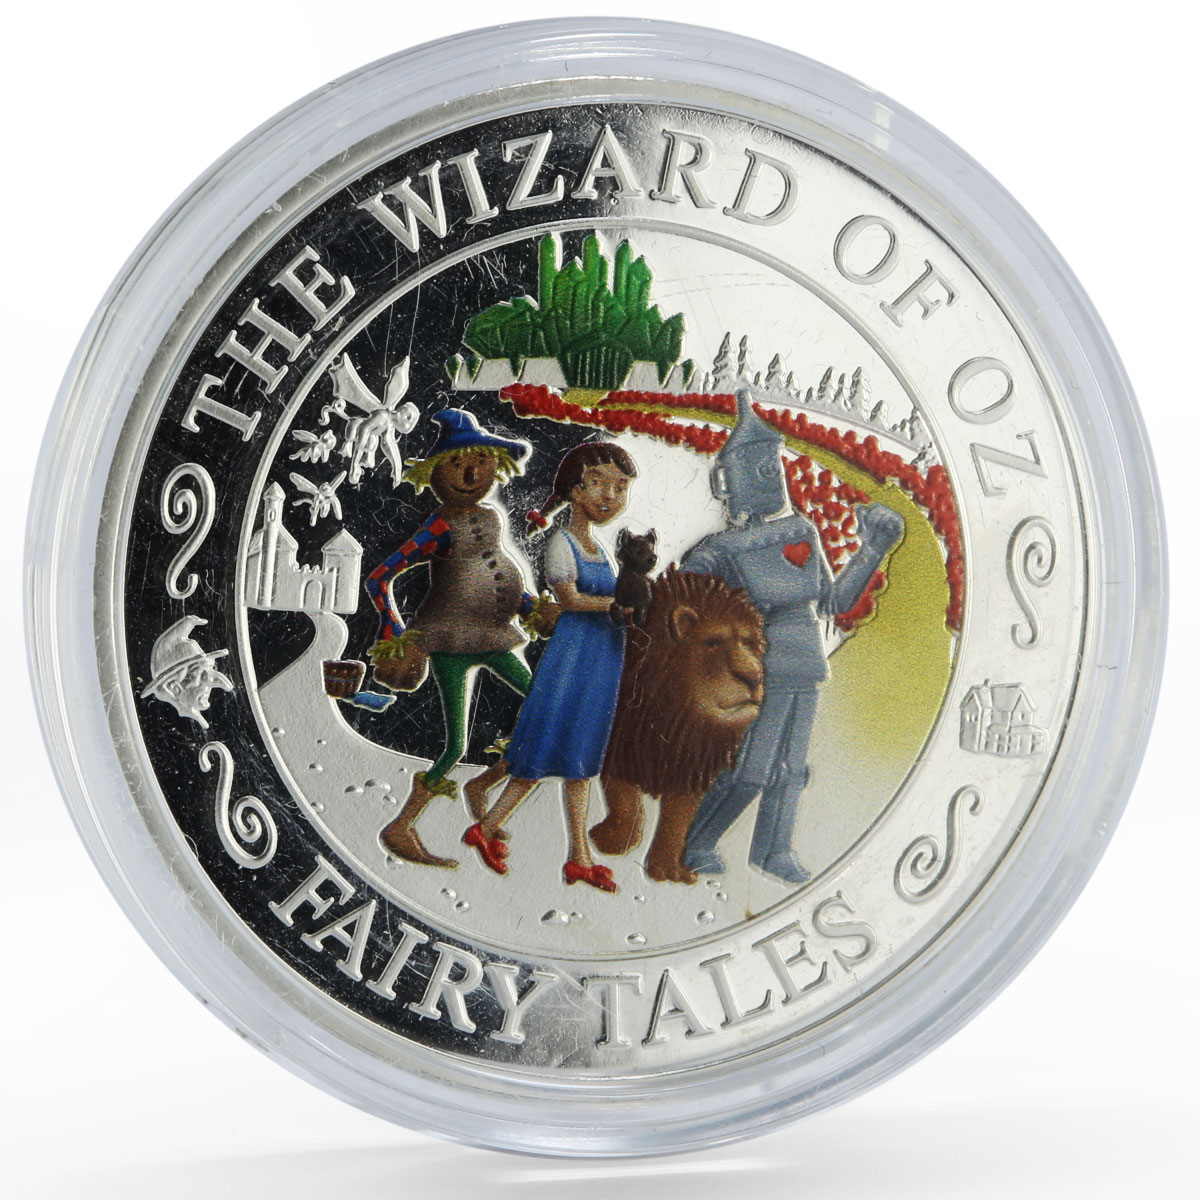 Solomon Islands 2 dollars Fairy Tales The Wizard of Oz colored silver coin 2014